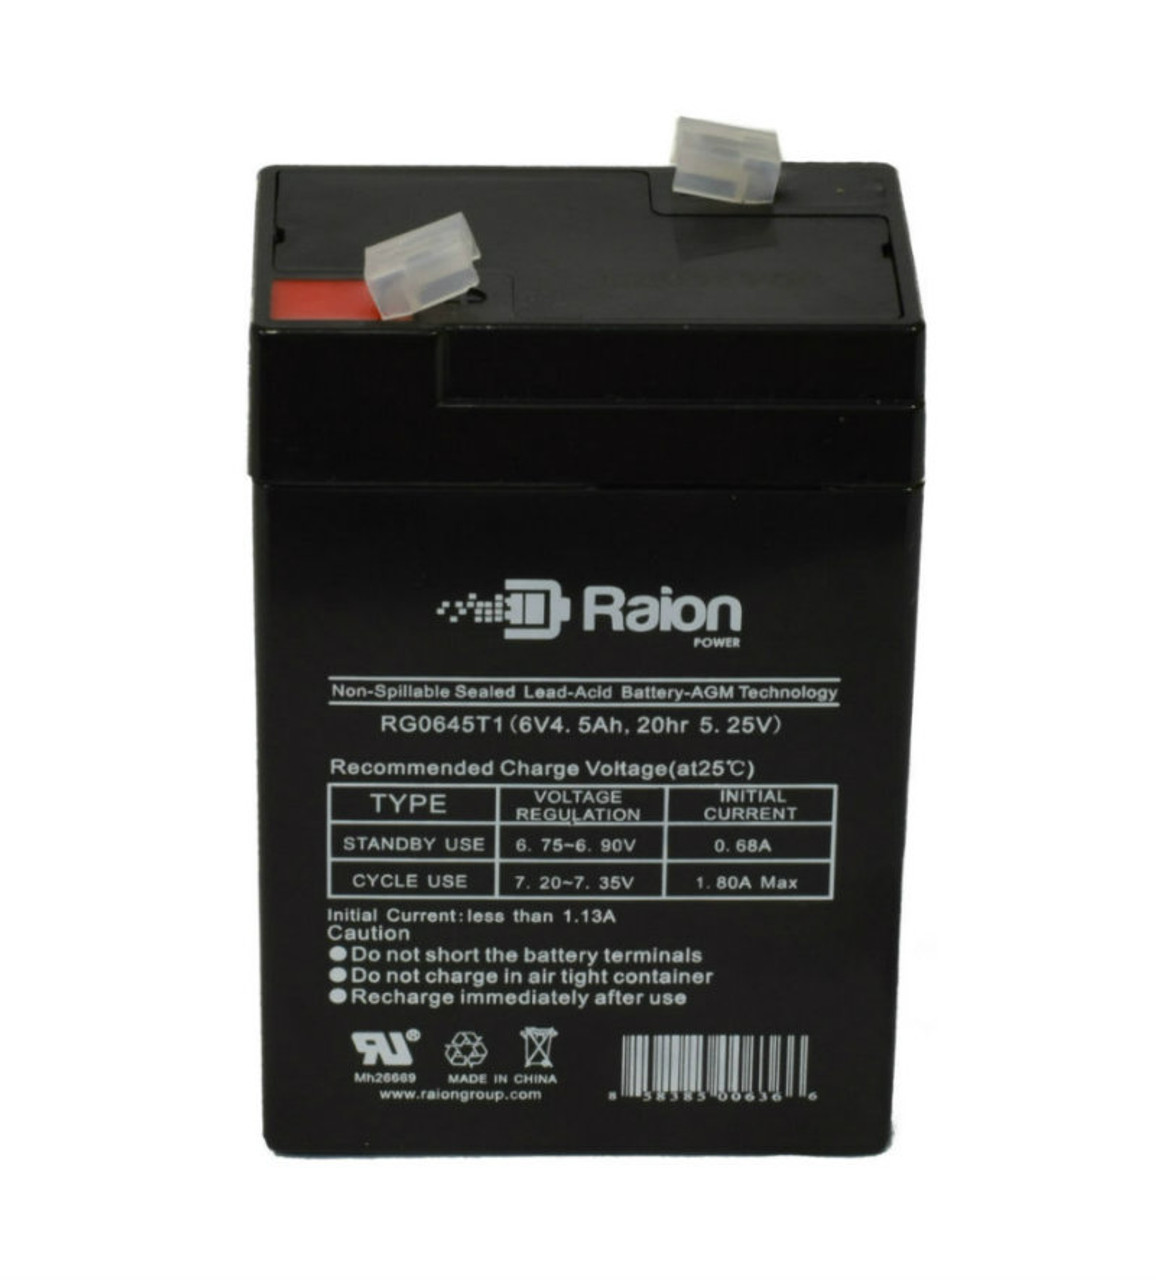 Raion Power RG0645T1 Replacement Battery Cartridge for Edwards 1620